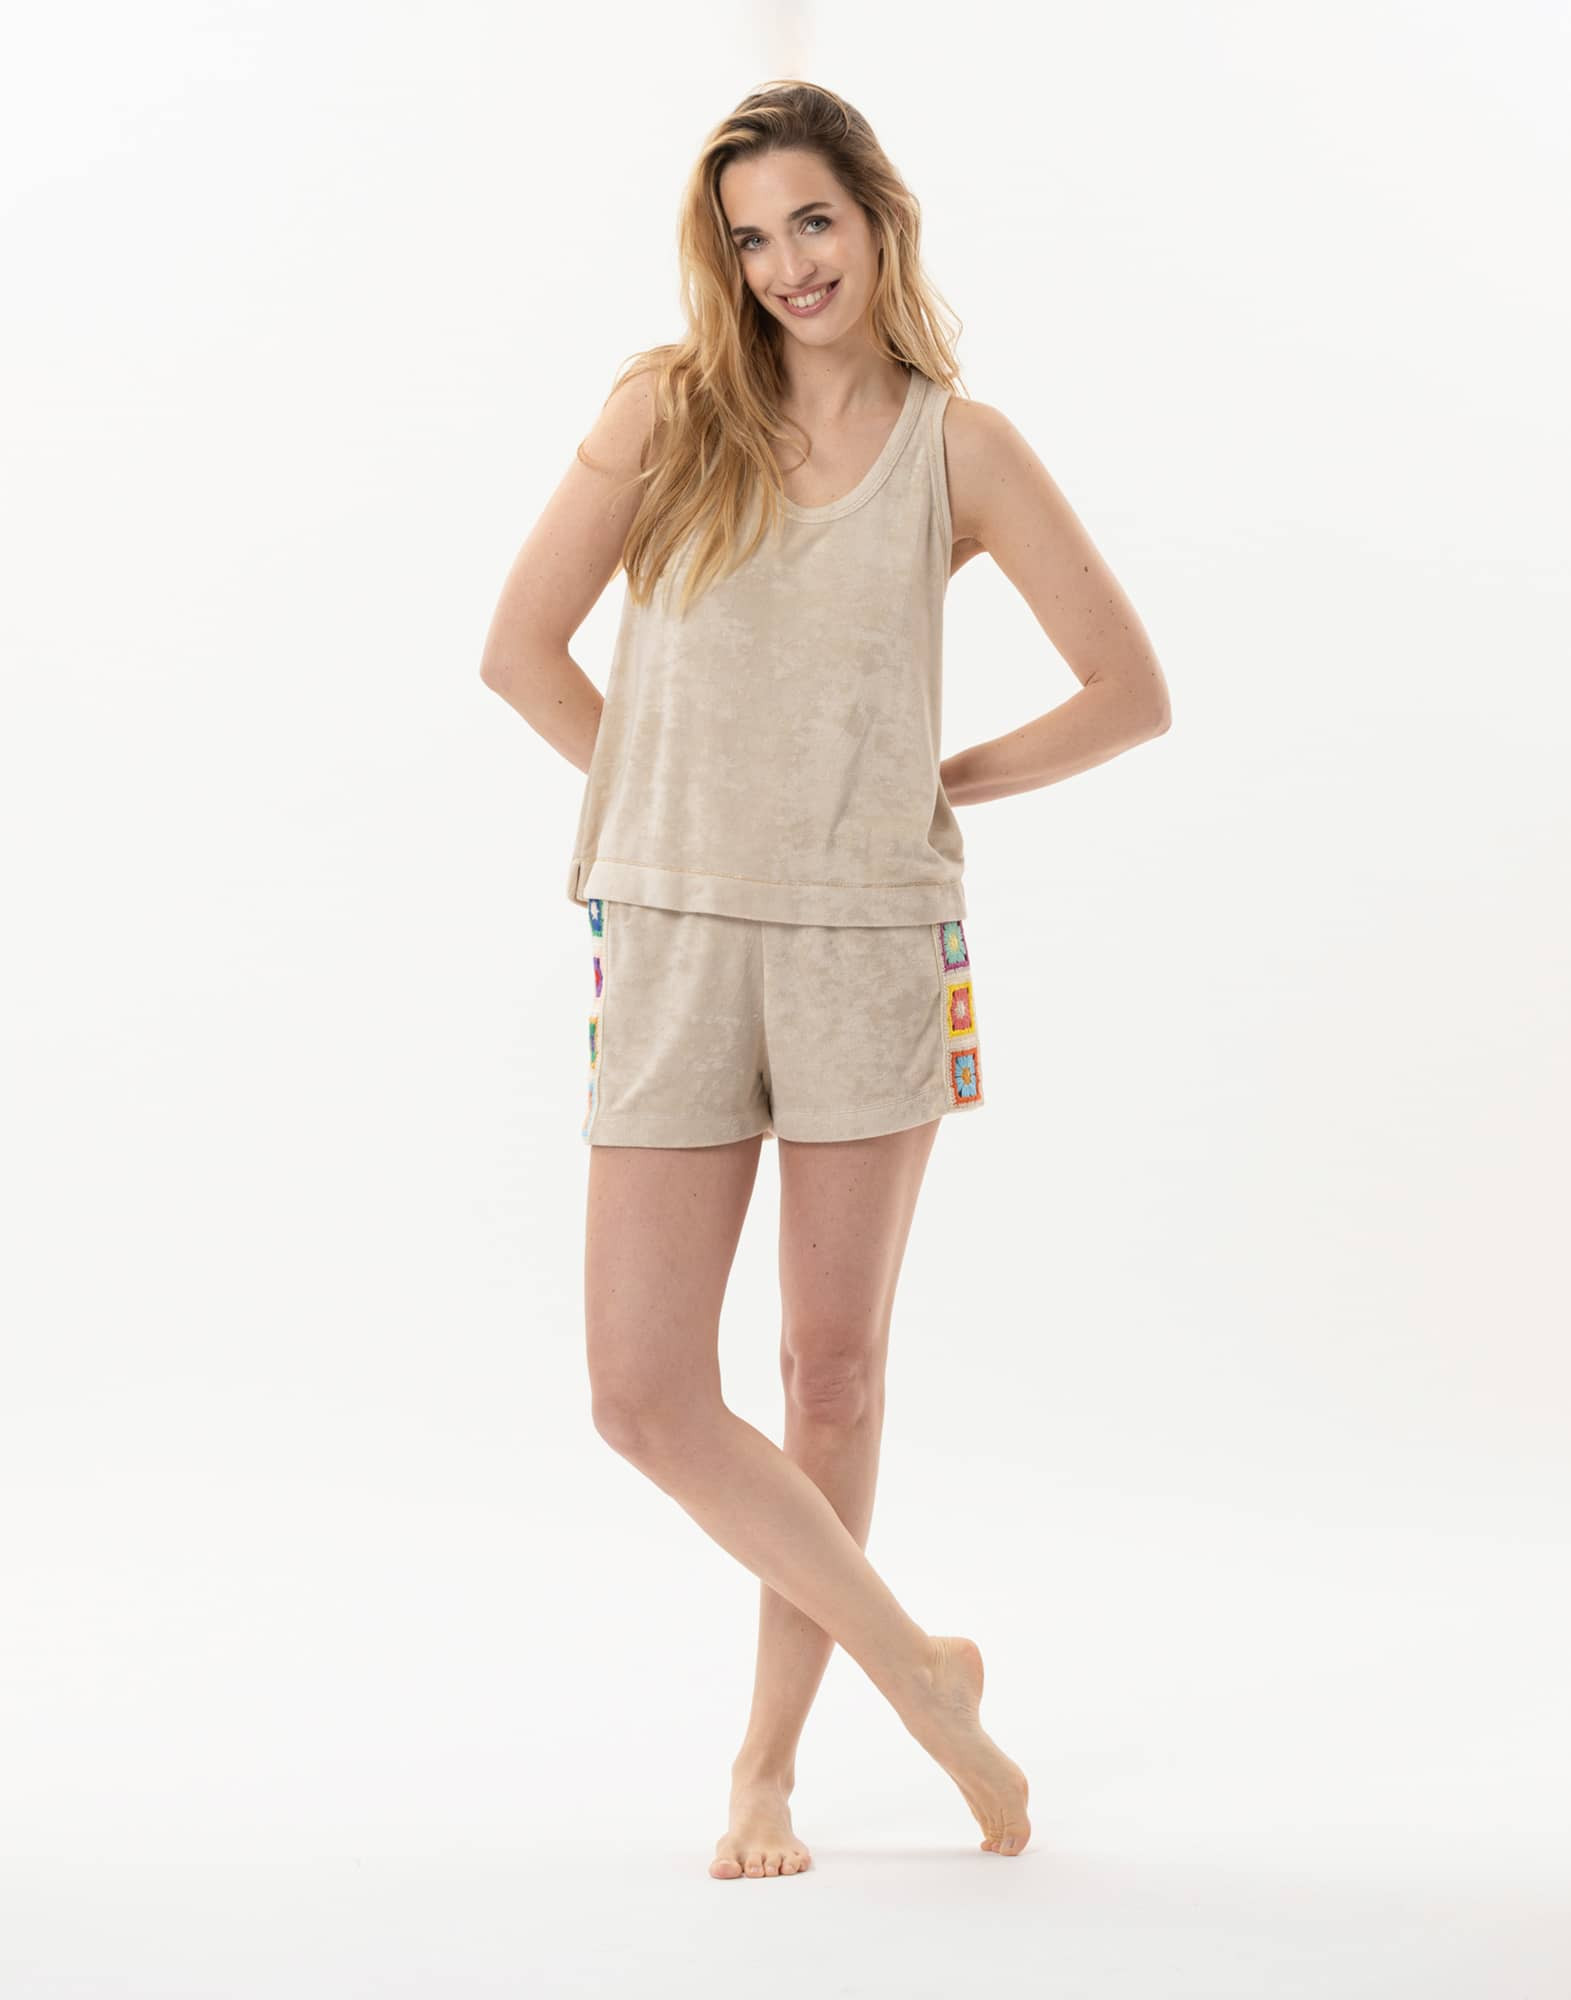 Terry-cloth tank top and shorts set SERENITY 700 shell